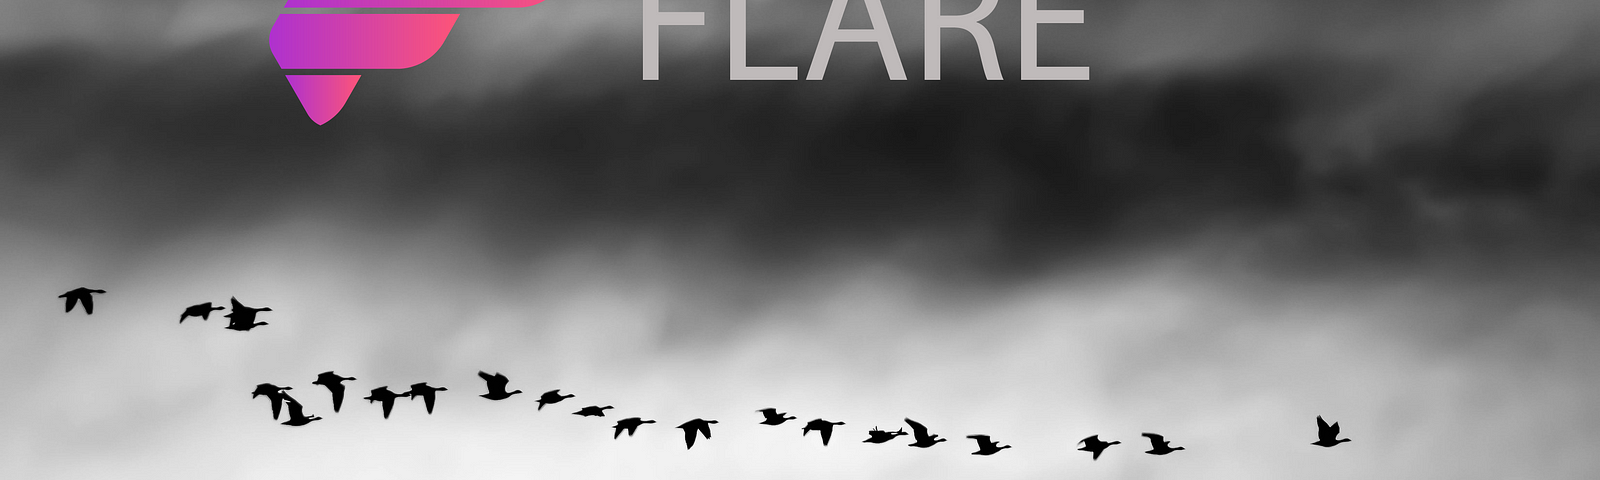 Flare – ProAndroidDev